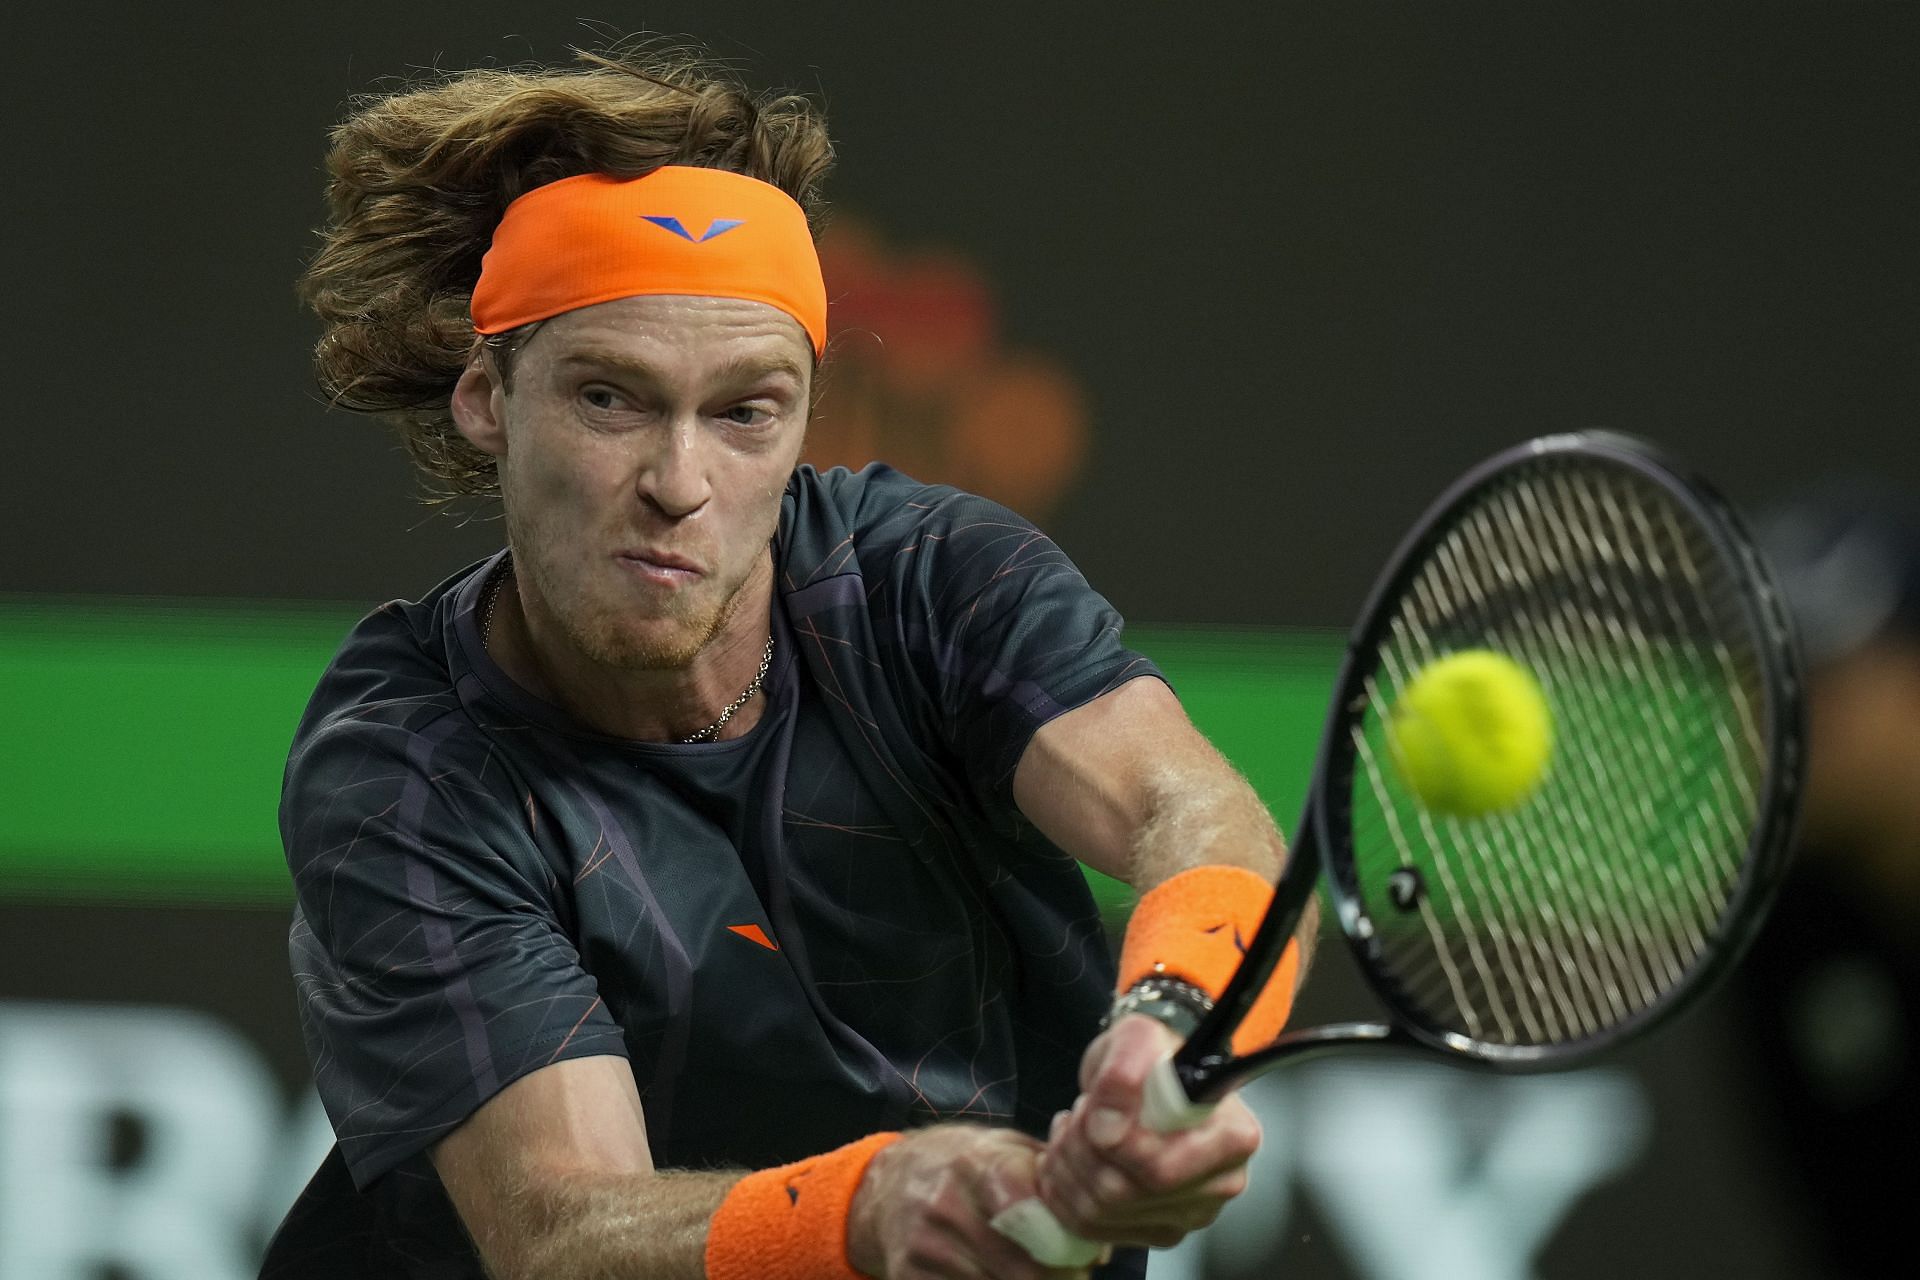 Rublev in action at the Shanghai Masters